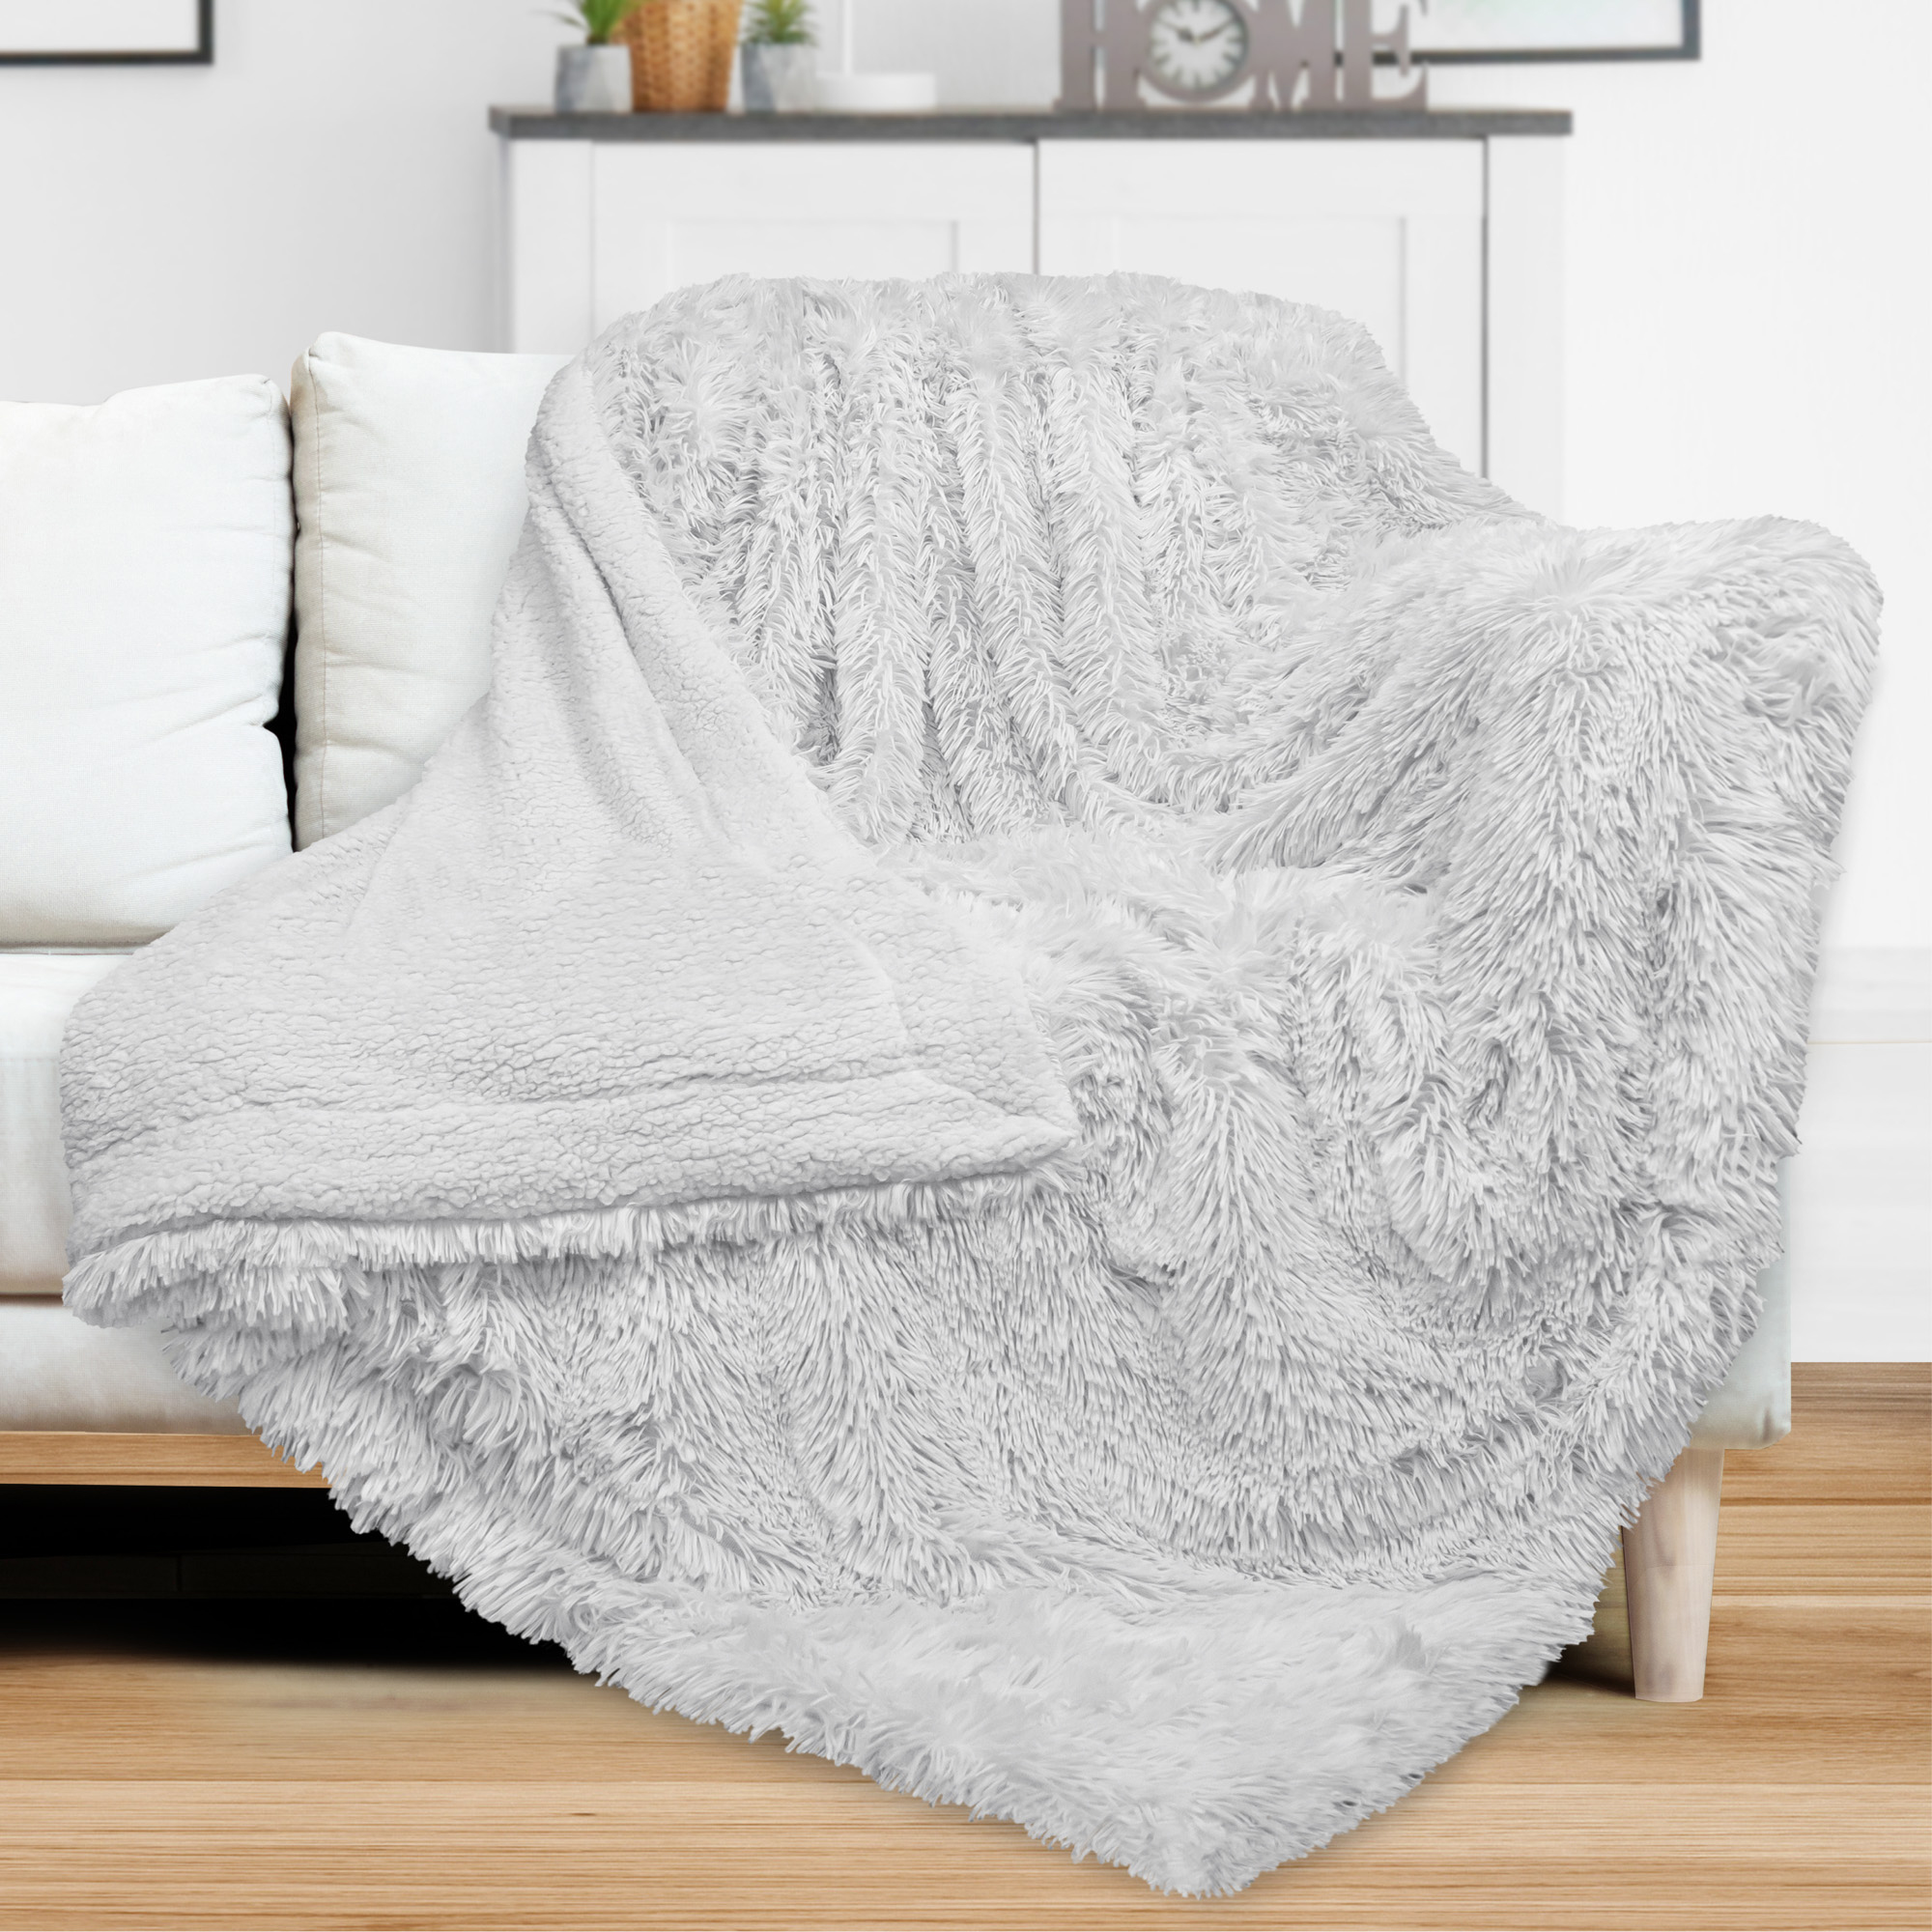 Faux Fur Throw Plush Soft Warm Sherpa for Bed Couch Sofa 50x60 Fleece Blanket 